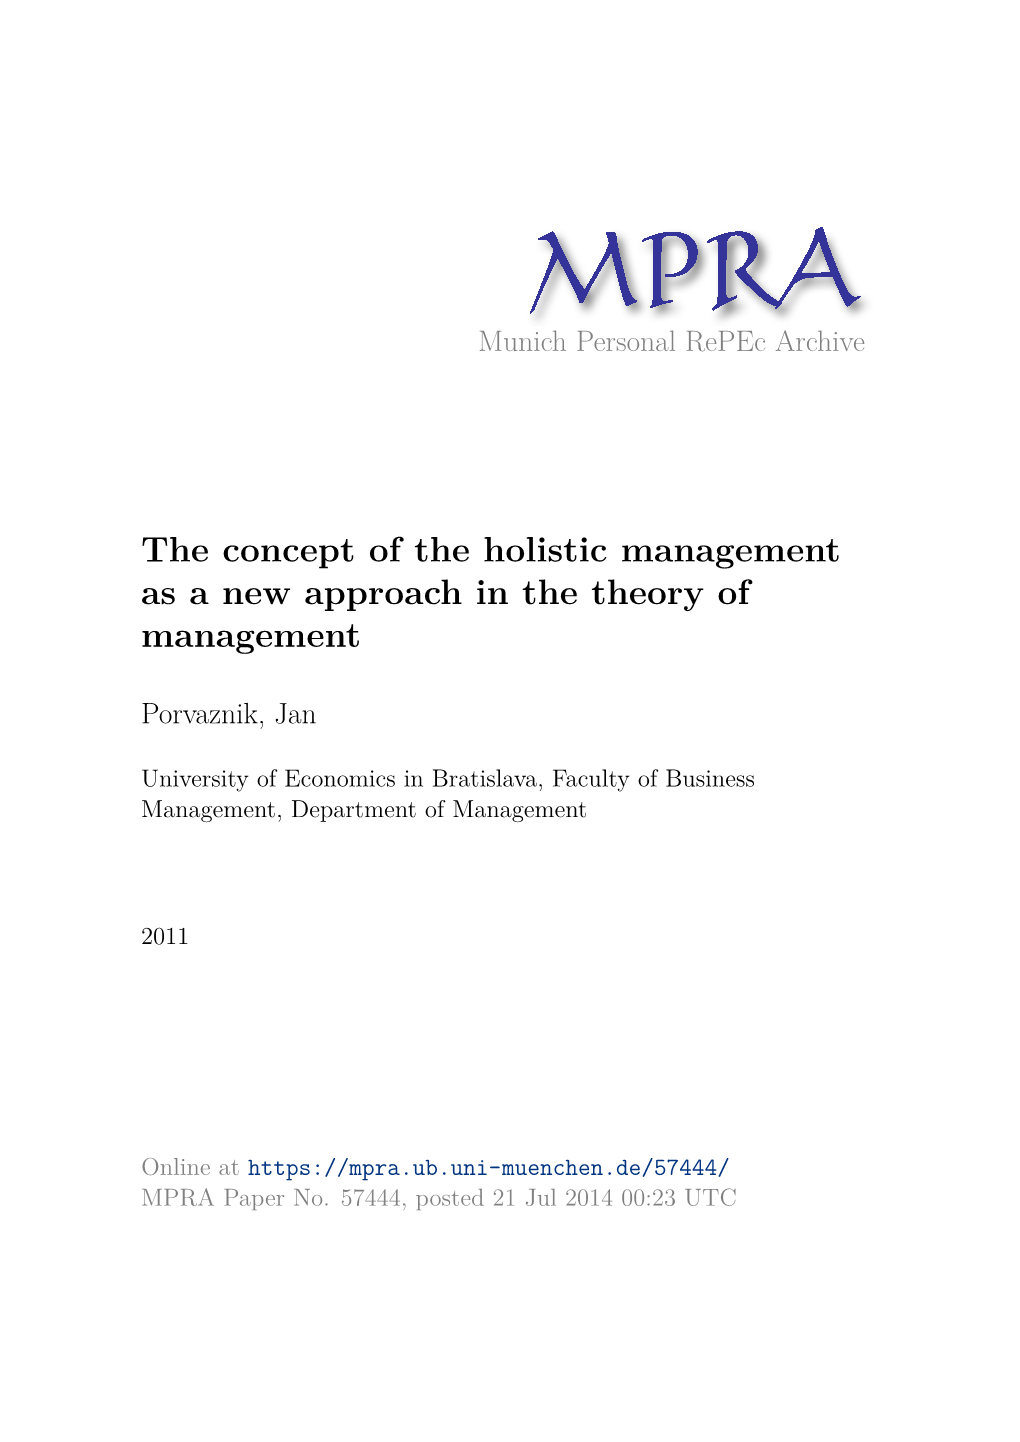 The Concept of the Holistic Management As a New Approach in the Theory of Management